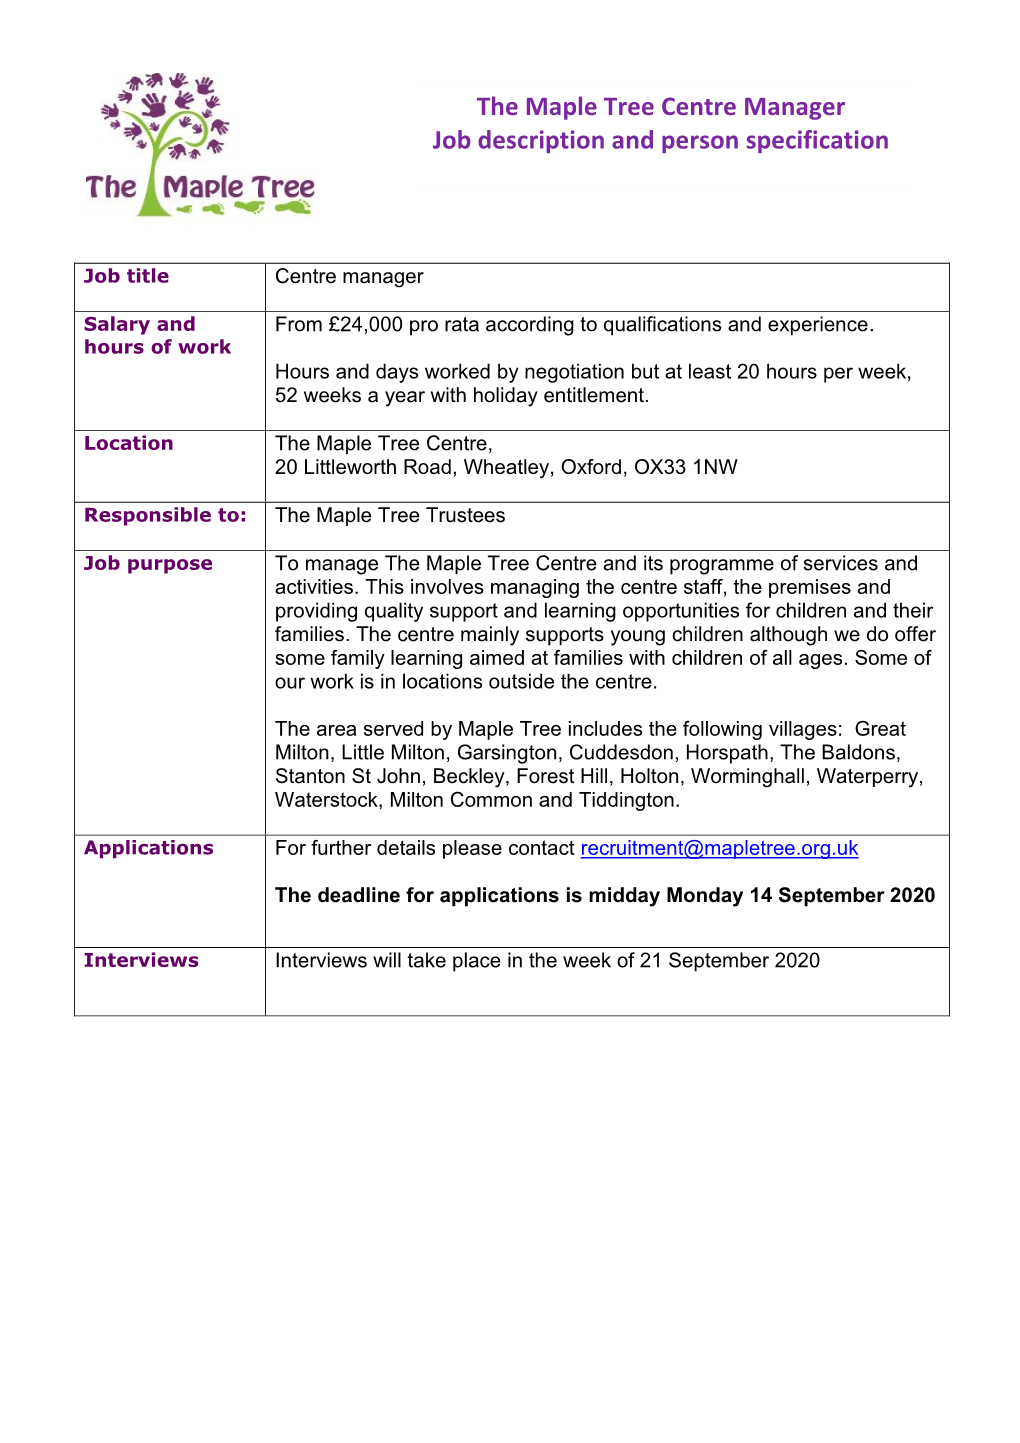 The Maple Tree Centre Manager Job Description and Person Specification